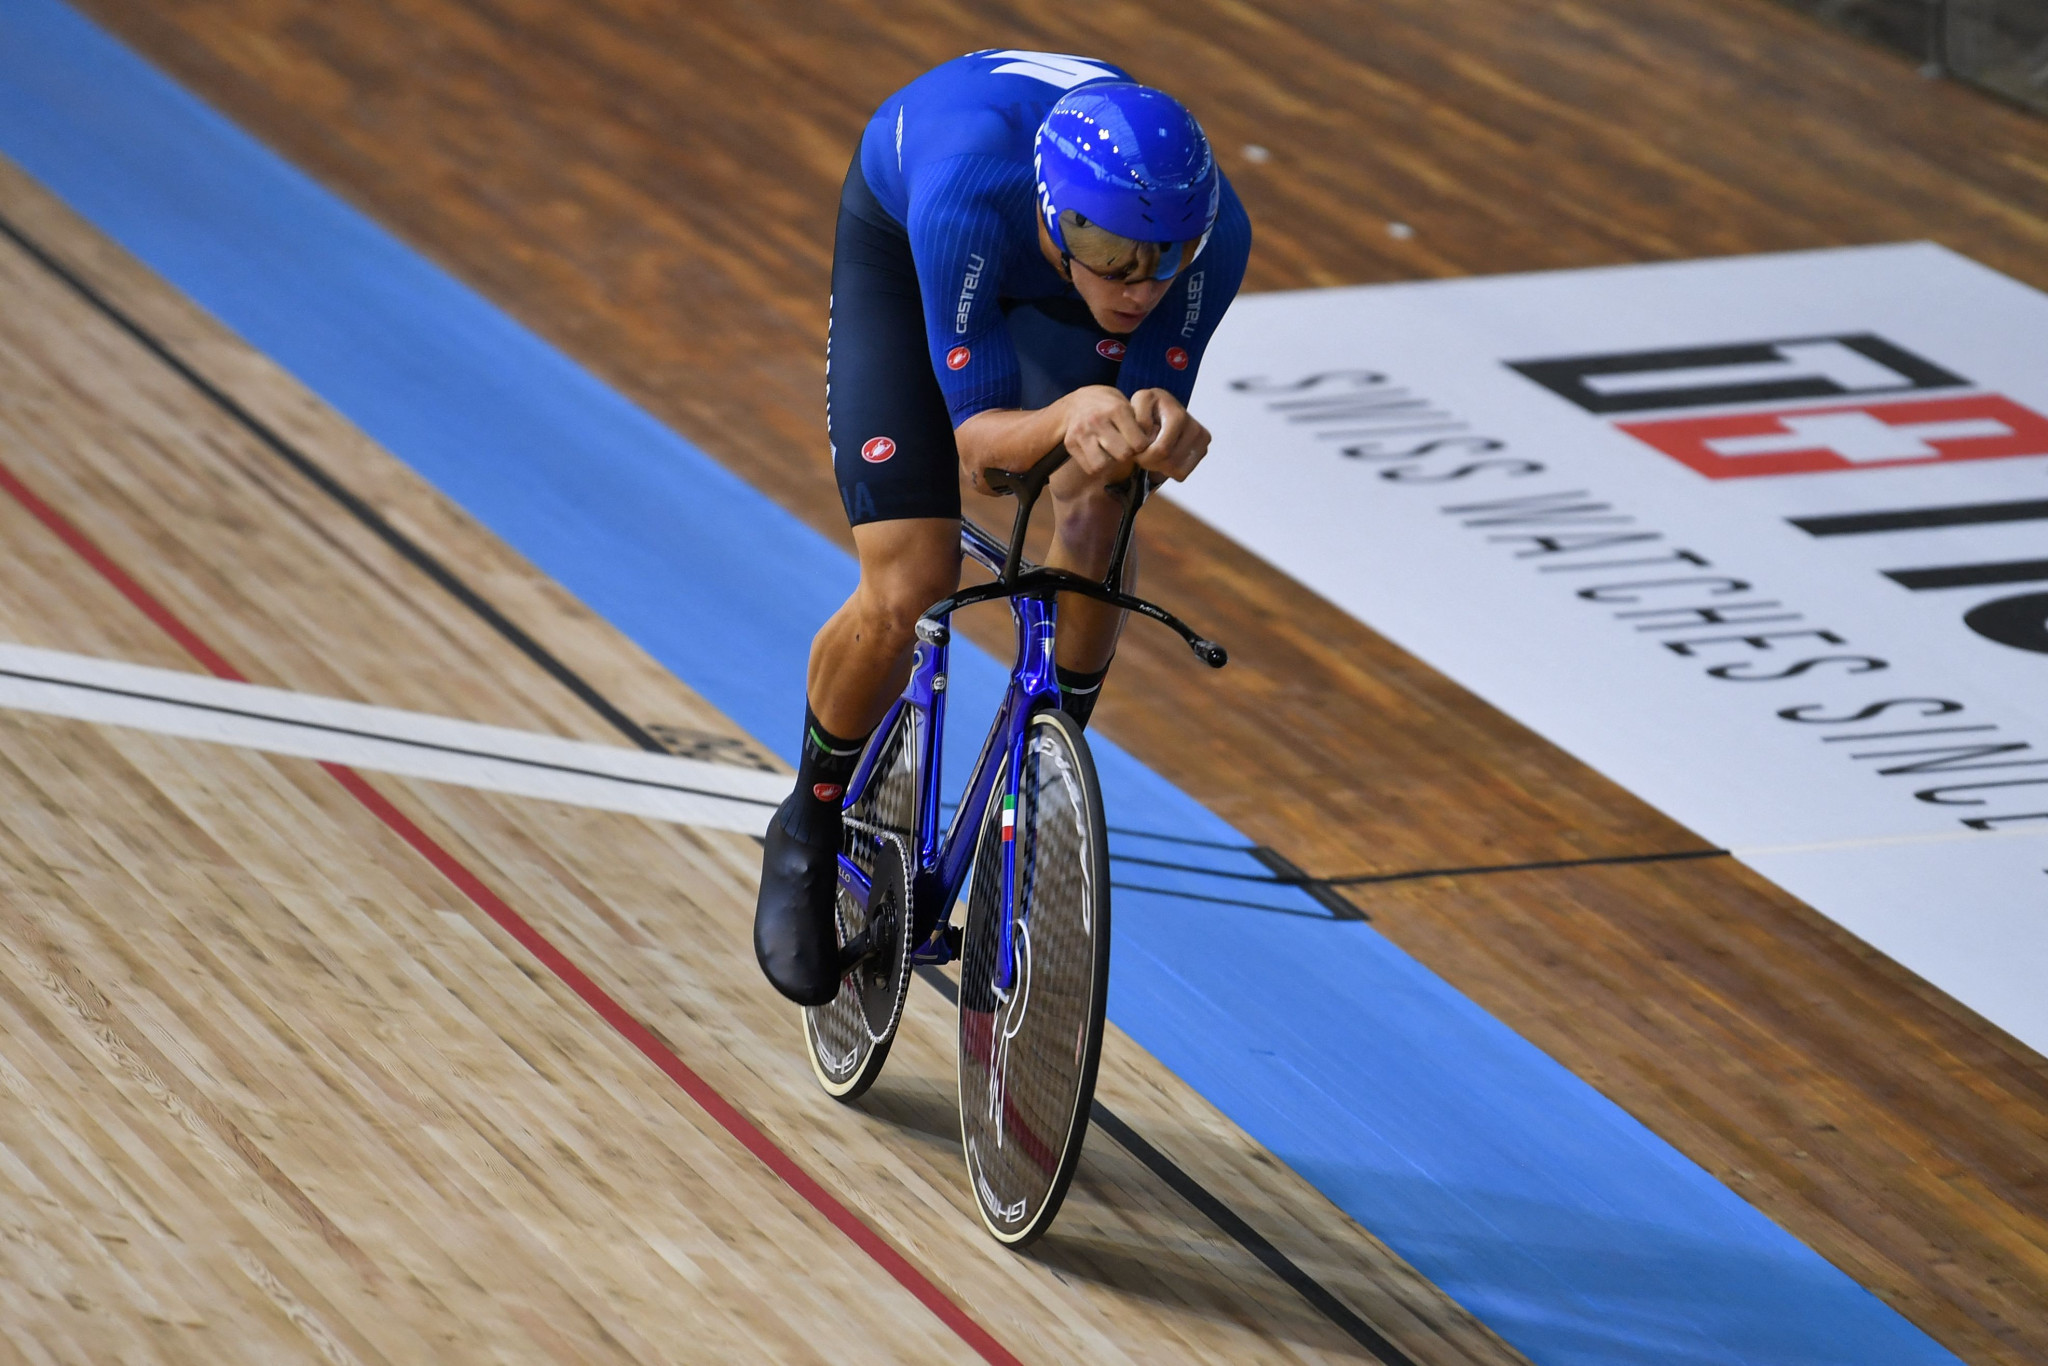 Romanian police recover bikes stolen from Italian team at UCI Track World Championships